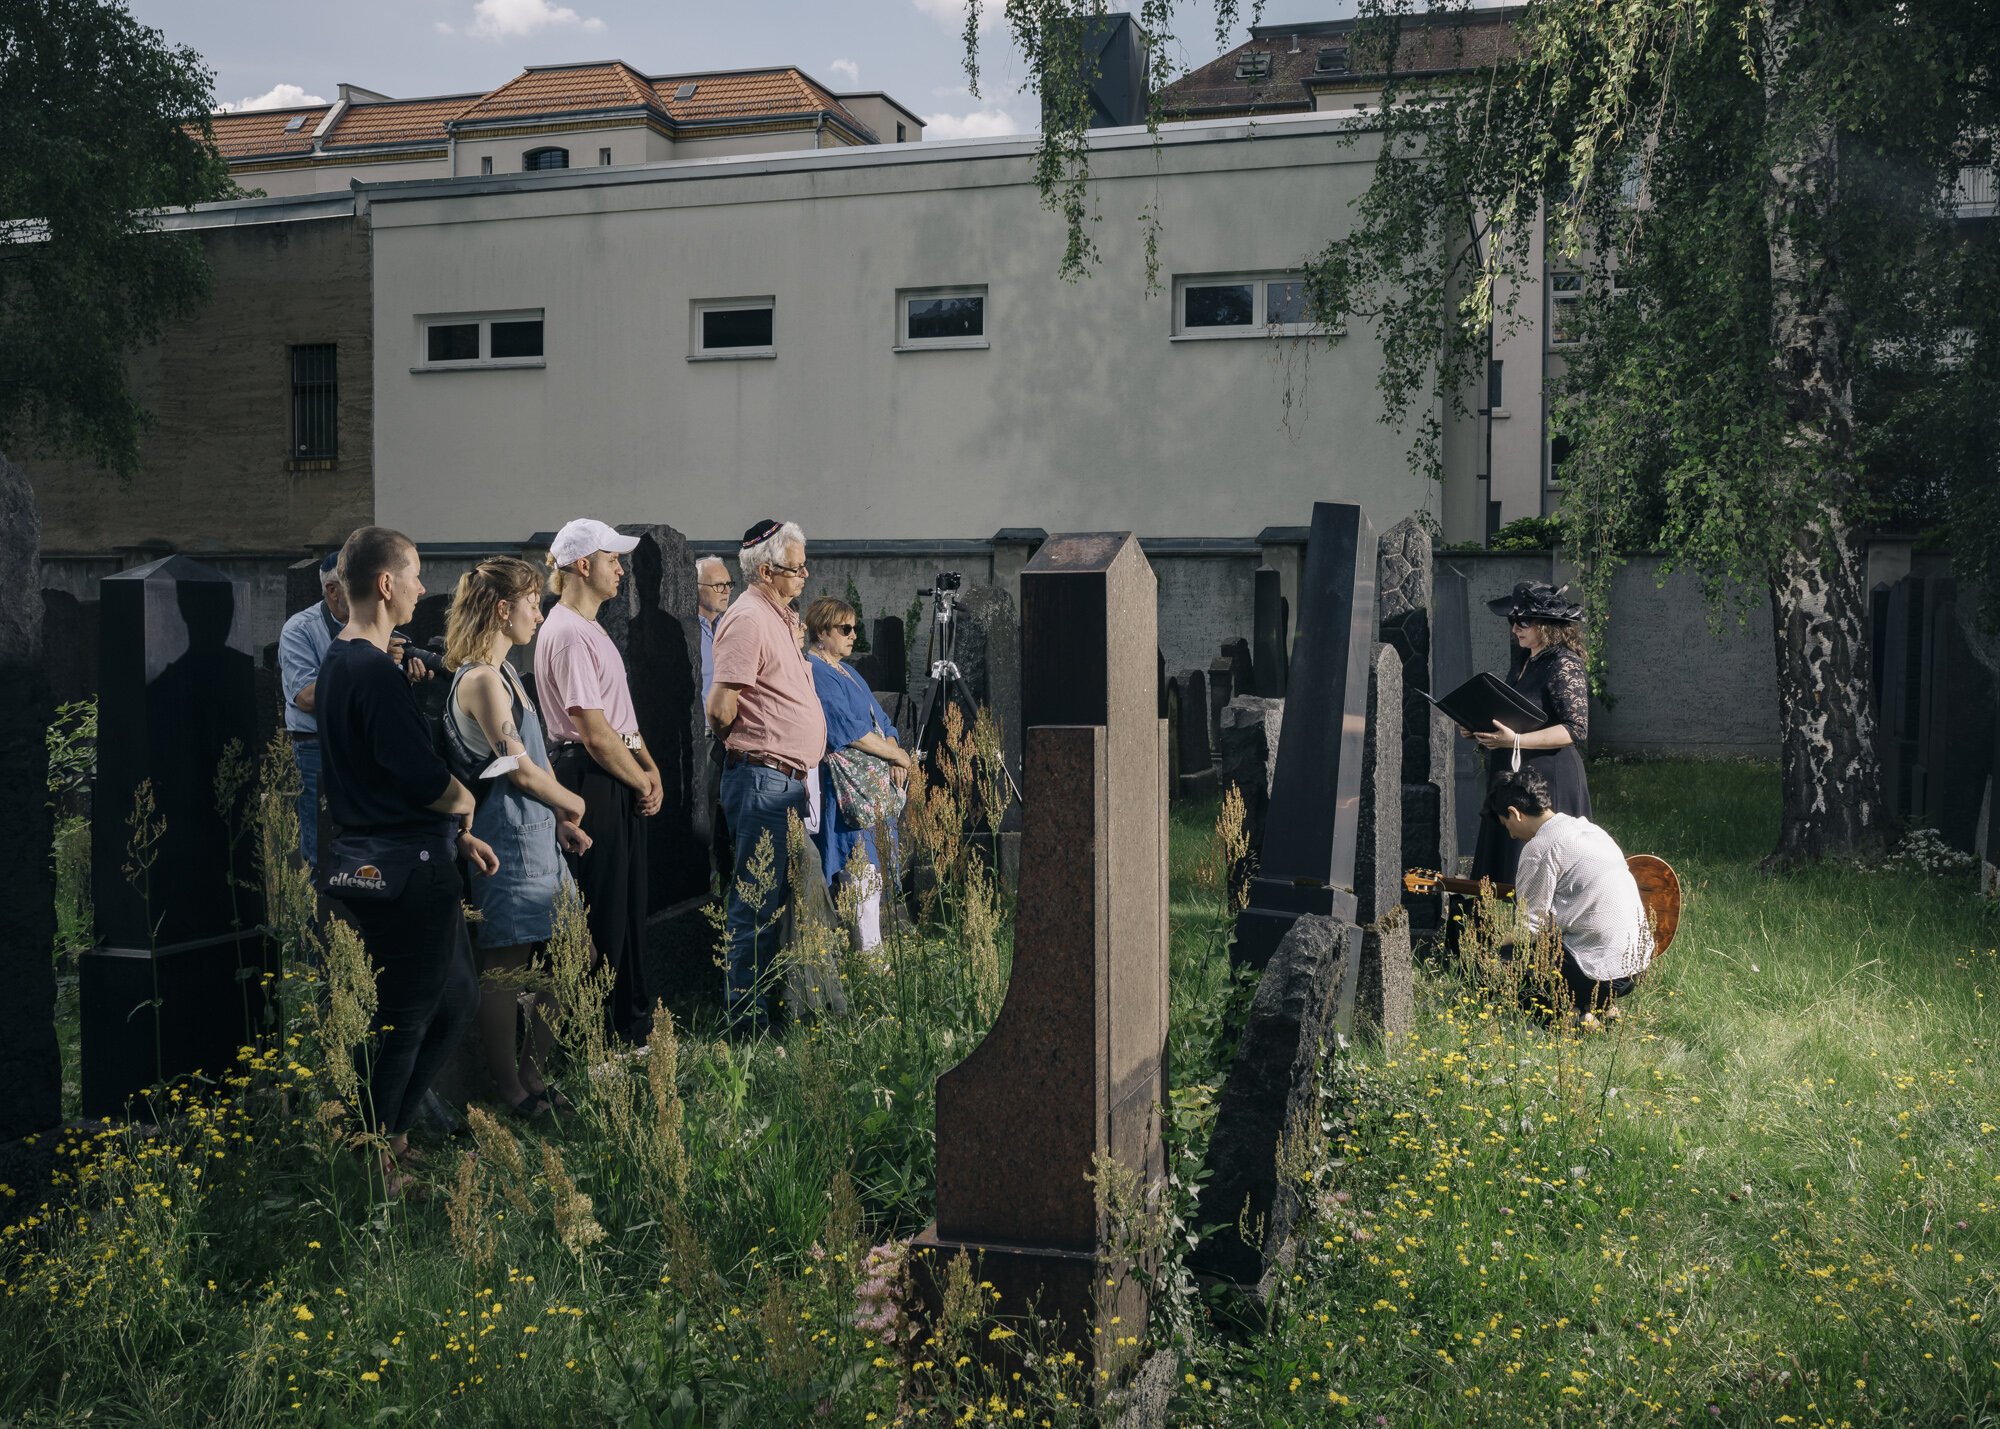  Peter M. (pink shirt) has travelled from Copenhagen for the "Jewish Week" to visit the grave of his ancestor "Esther Adelski" at the Jewish cemetery in Leipzig. At the grave, Rabbi Esther Jonas-Märtin holds a ceremony. Peter's family lives in Denmar